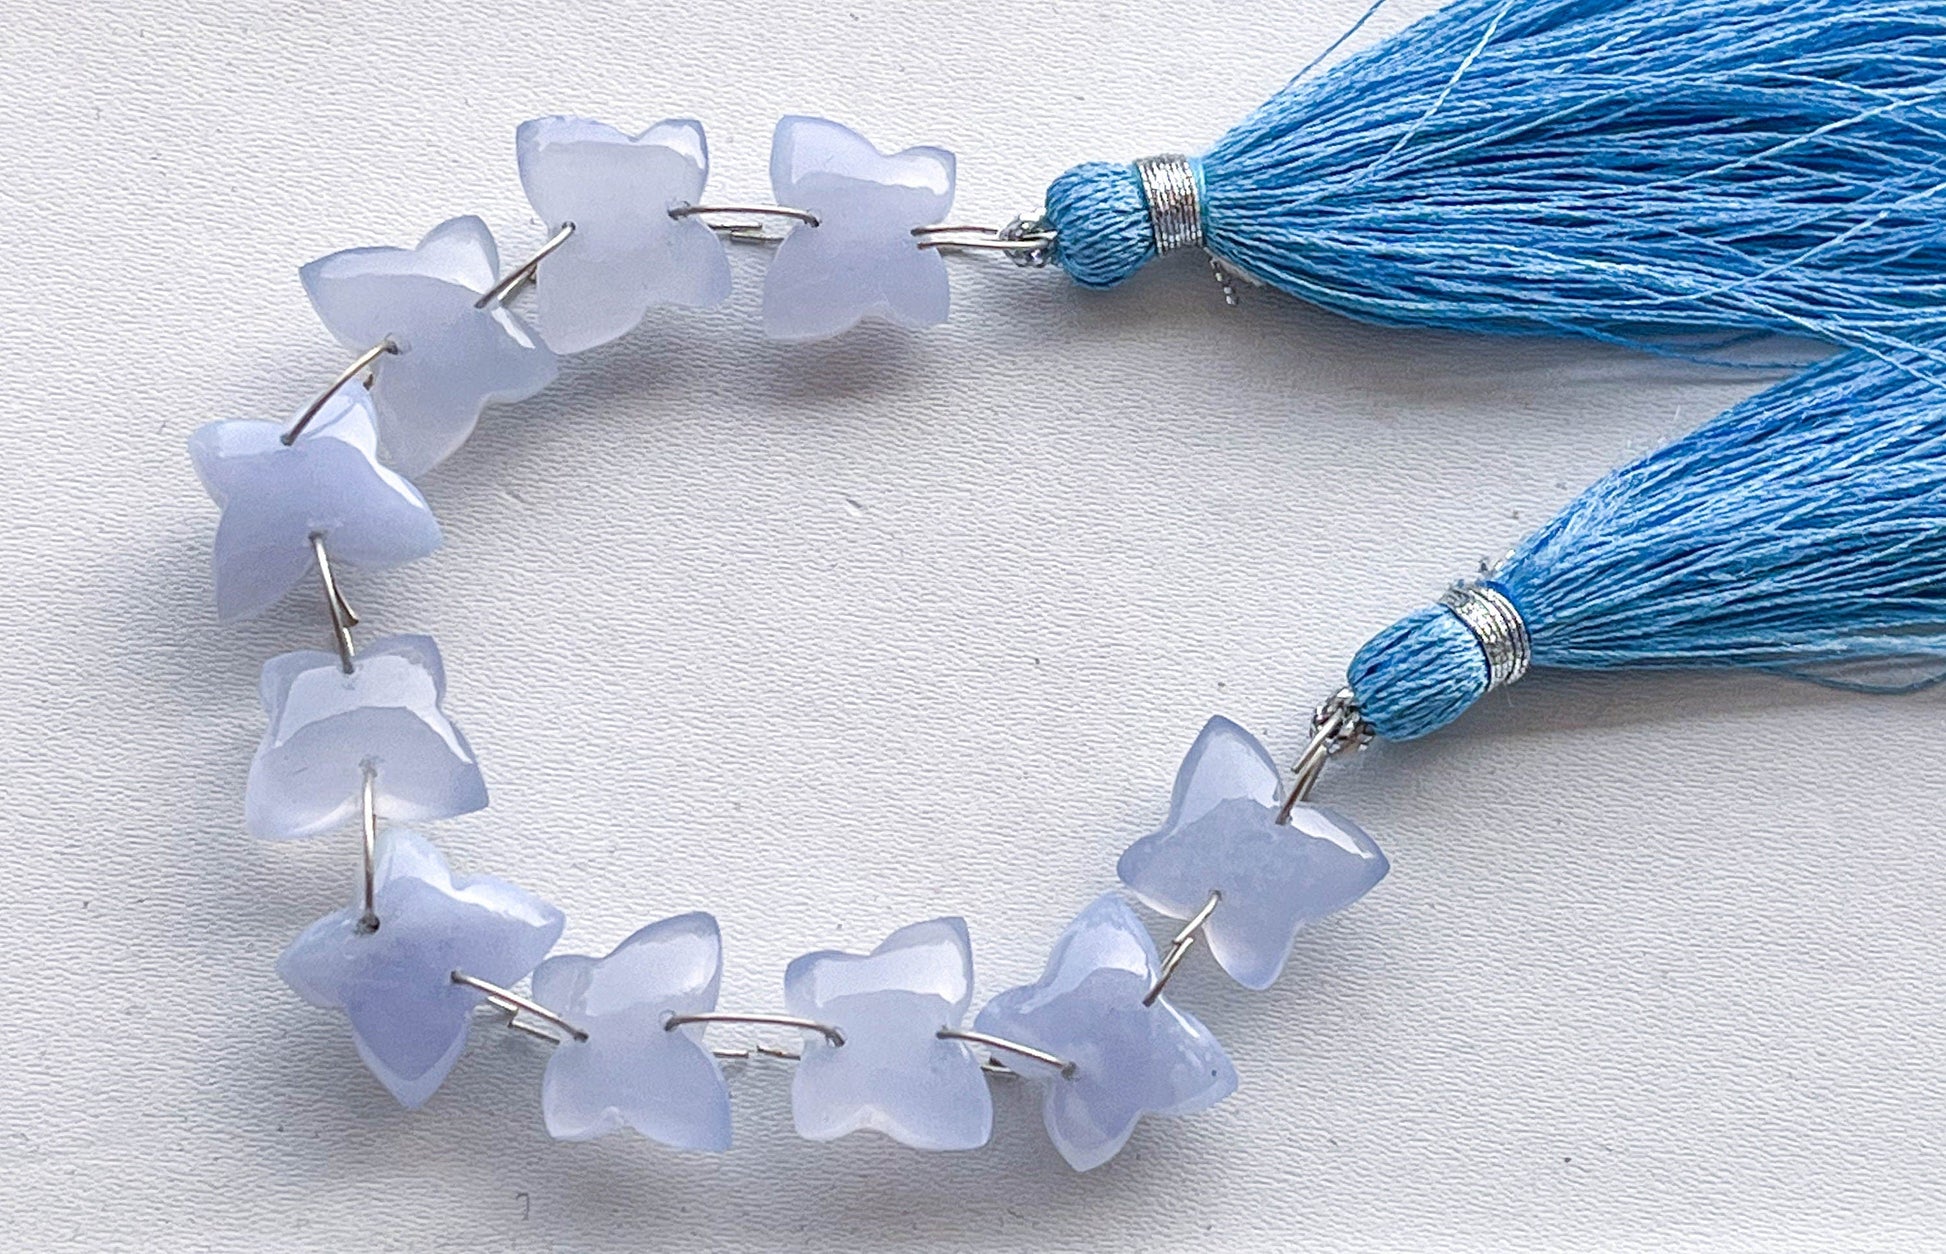 Blue Chalcedony Smooth Butterfly Shape Double Drill Beads, Rare Gemstone Design for Jewelry Making, 10x12mm, 10 Pieces String Beadsforyourjewelry